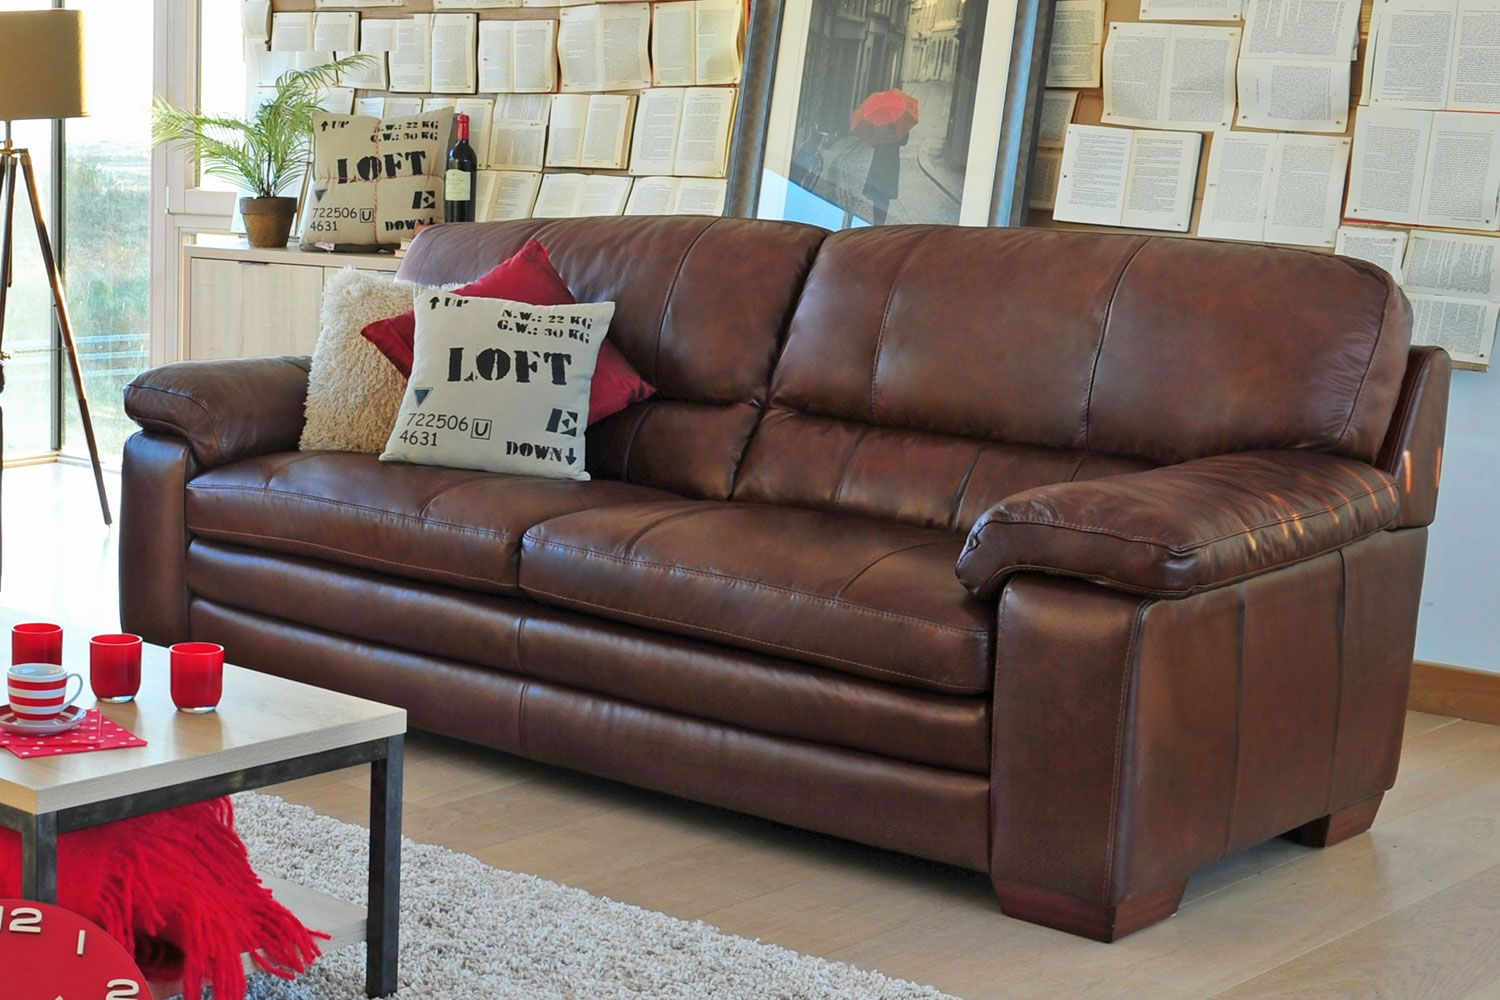 red leather sofa northern ireland